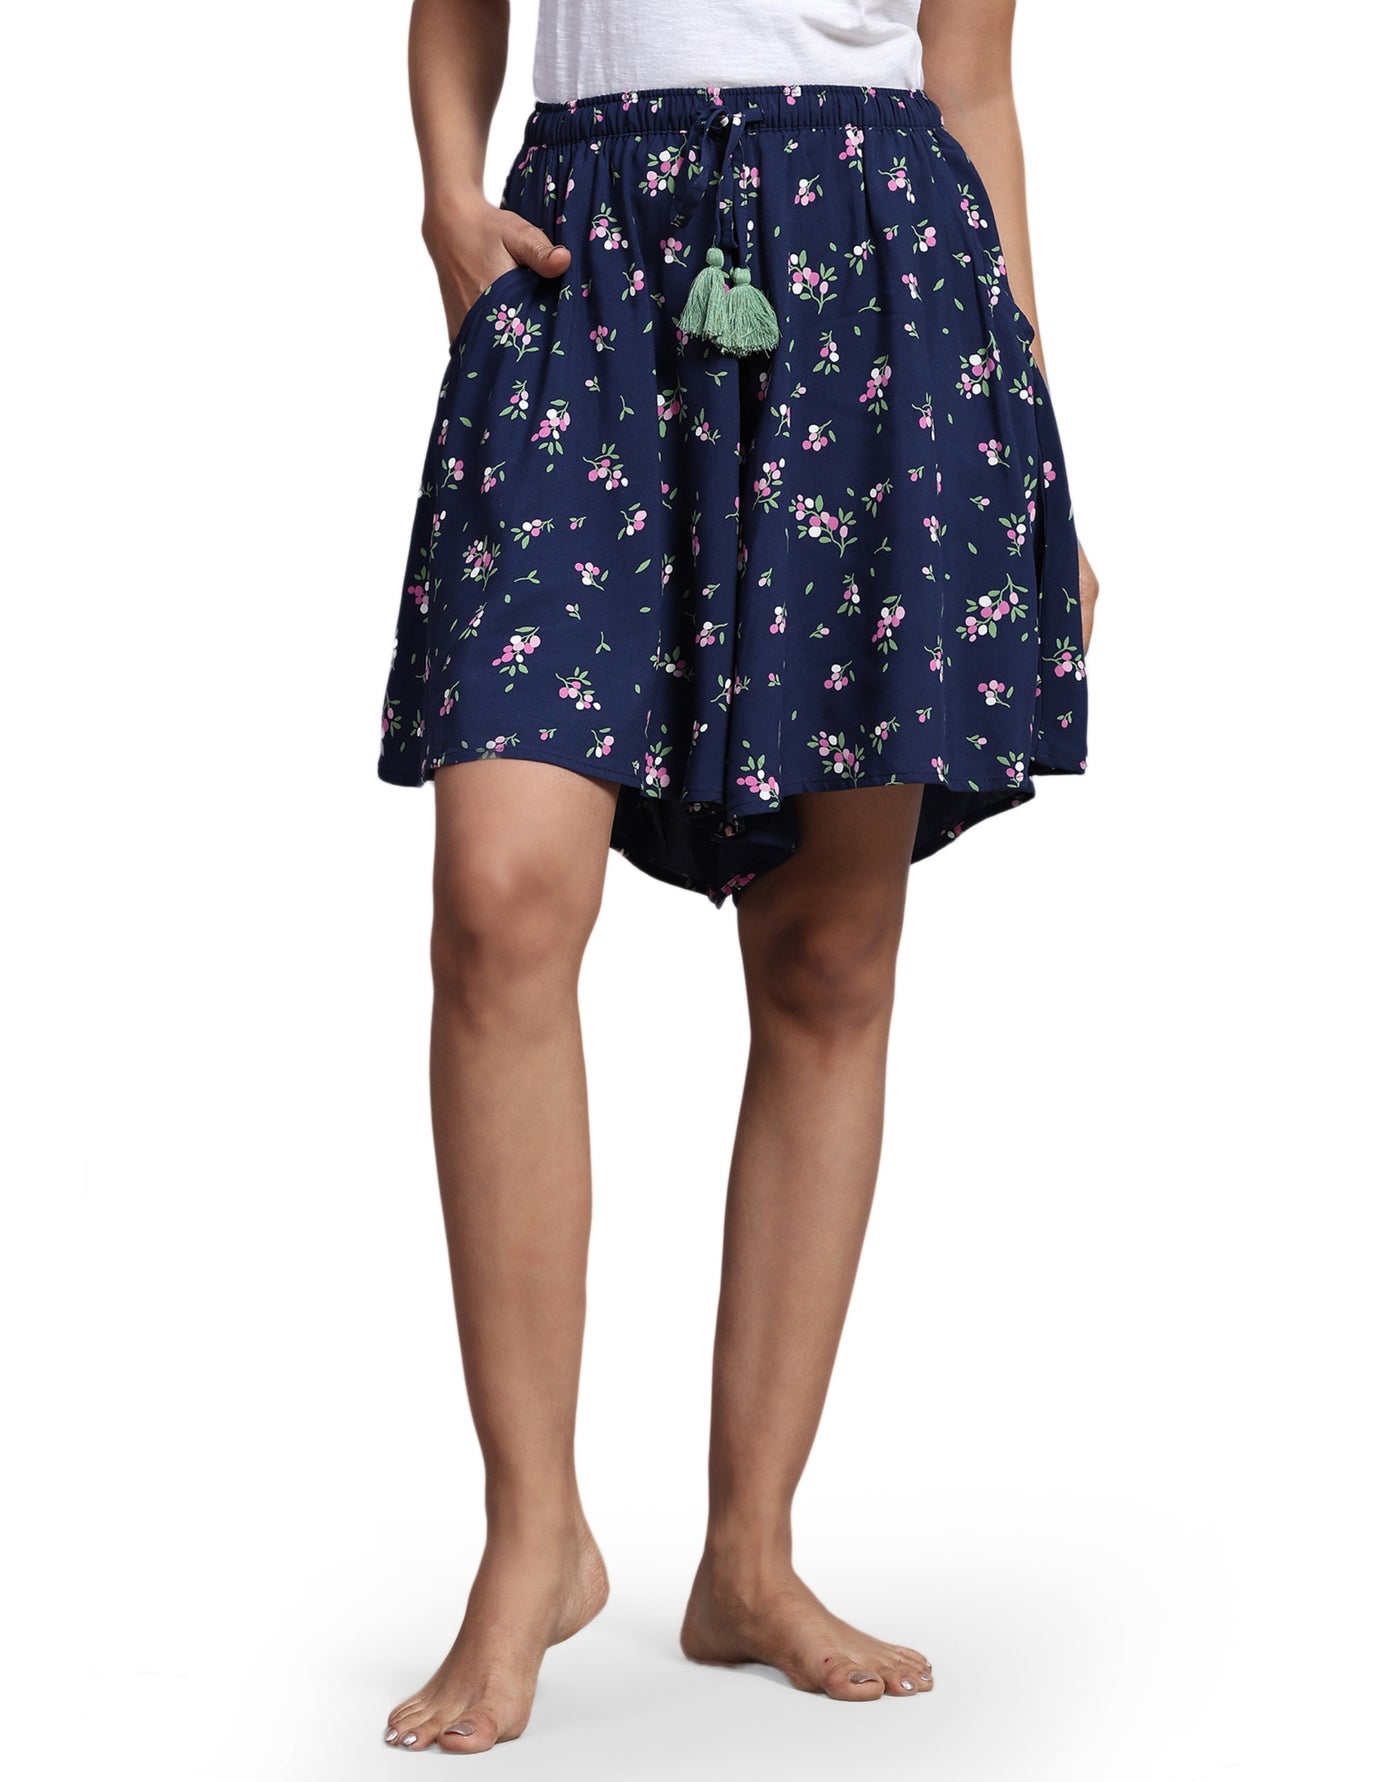 Culotte Shorts for Women-Navy Floral